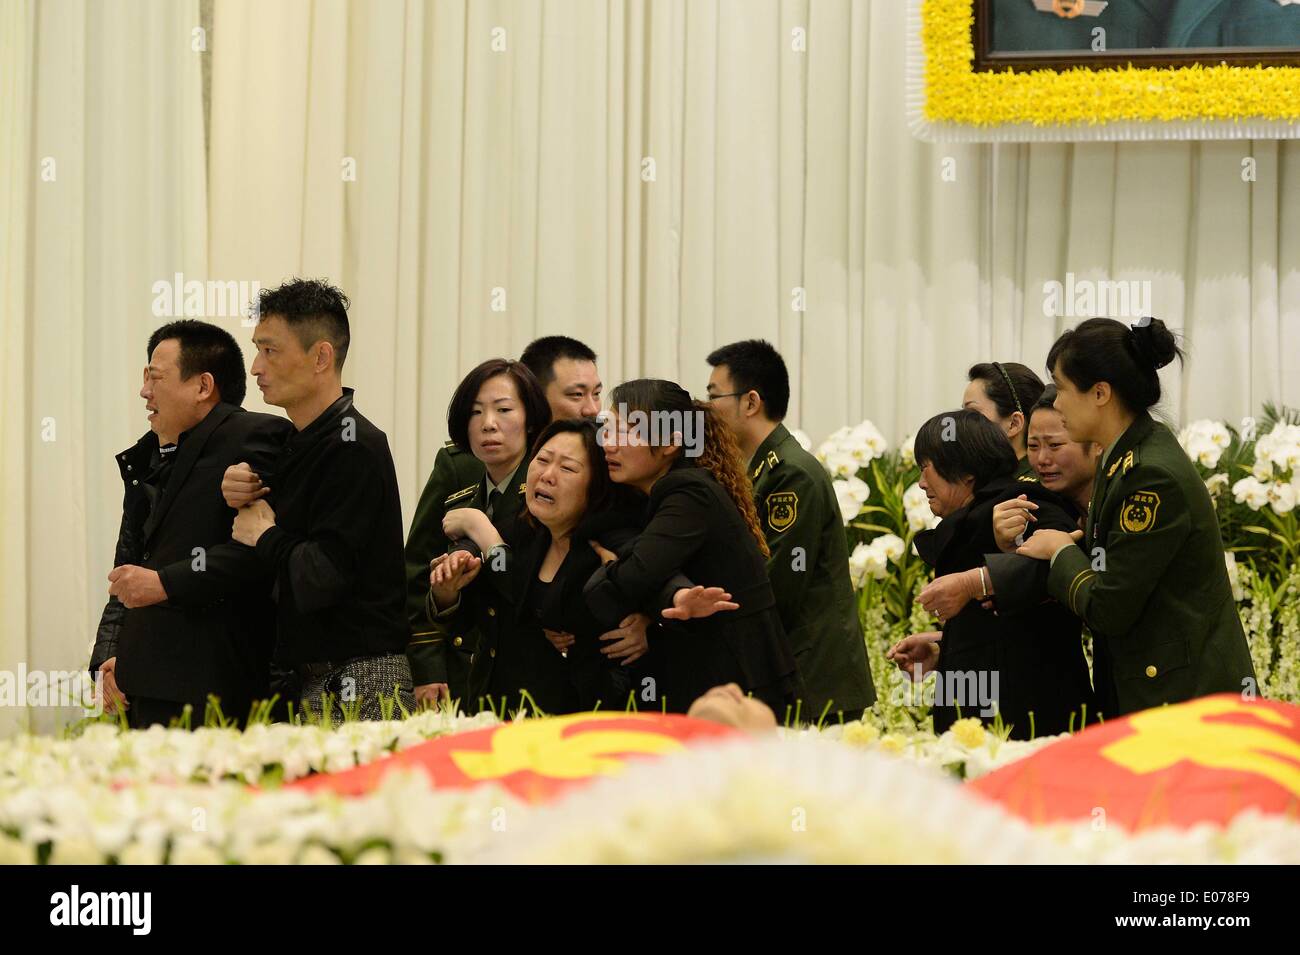 Shanghai, China. 5th May, 2014. Relatives wail as they mourn for Qian Lingyun and Liu Jie, two young Chinese firefighters who fell to their death during a blaze in a highrise building, at a memorial meeting in Shanghai, east China, May 5, 2014. Qian Lingyun and Liu Jie, who were born in 1991 and 1994 respectively, died on May 3 while responding to the fire in an apartment on the 13th floor of the building where a sudden blast occurred and the force blew them through an open window. © Lai Xinlin/Xinhua/Alamy Live News Stock Photo